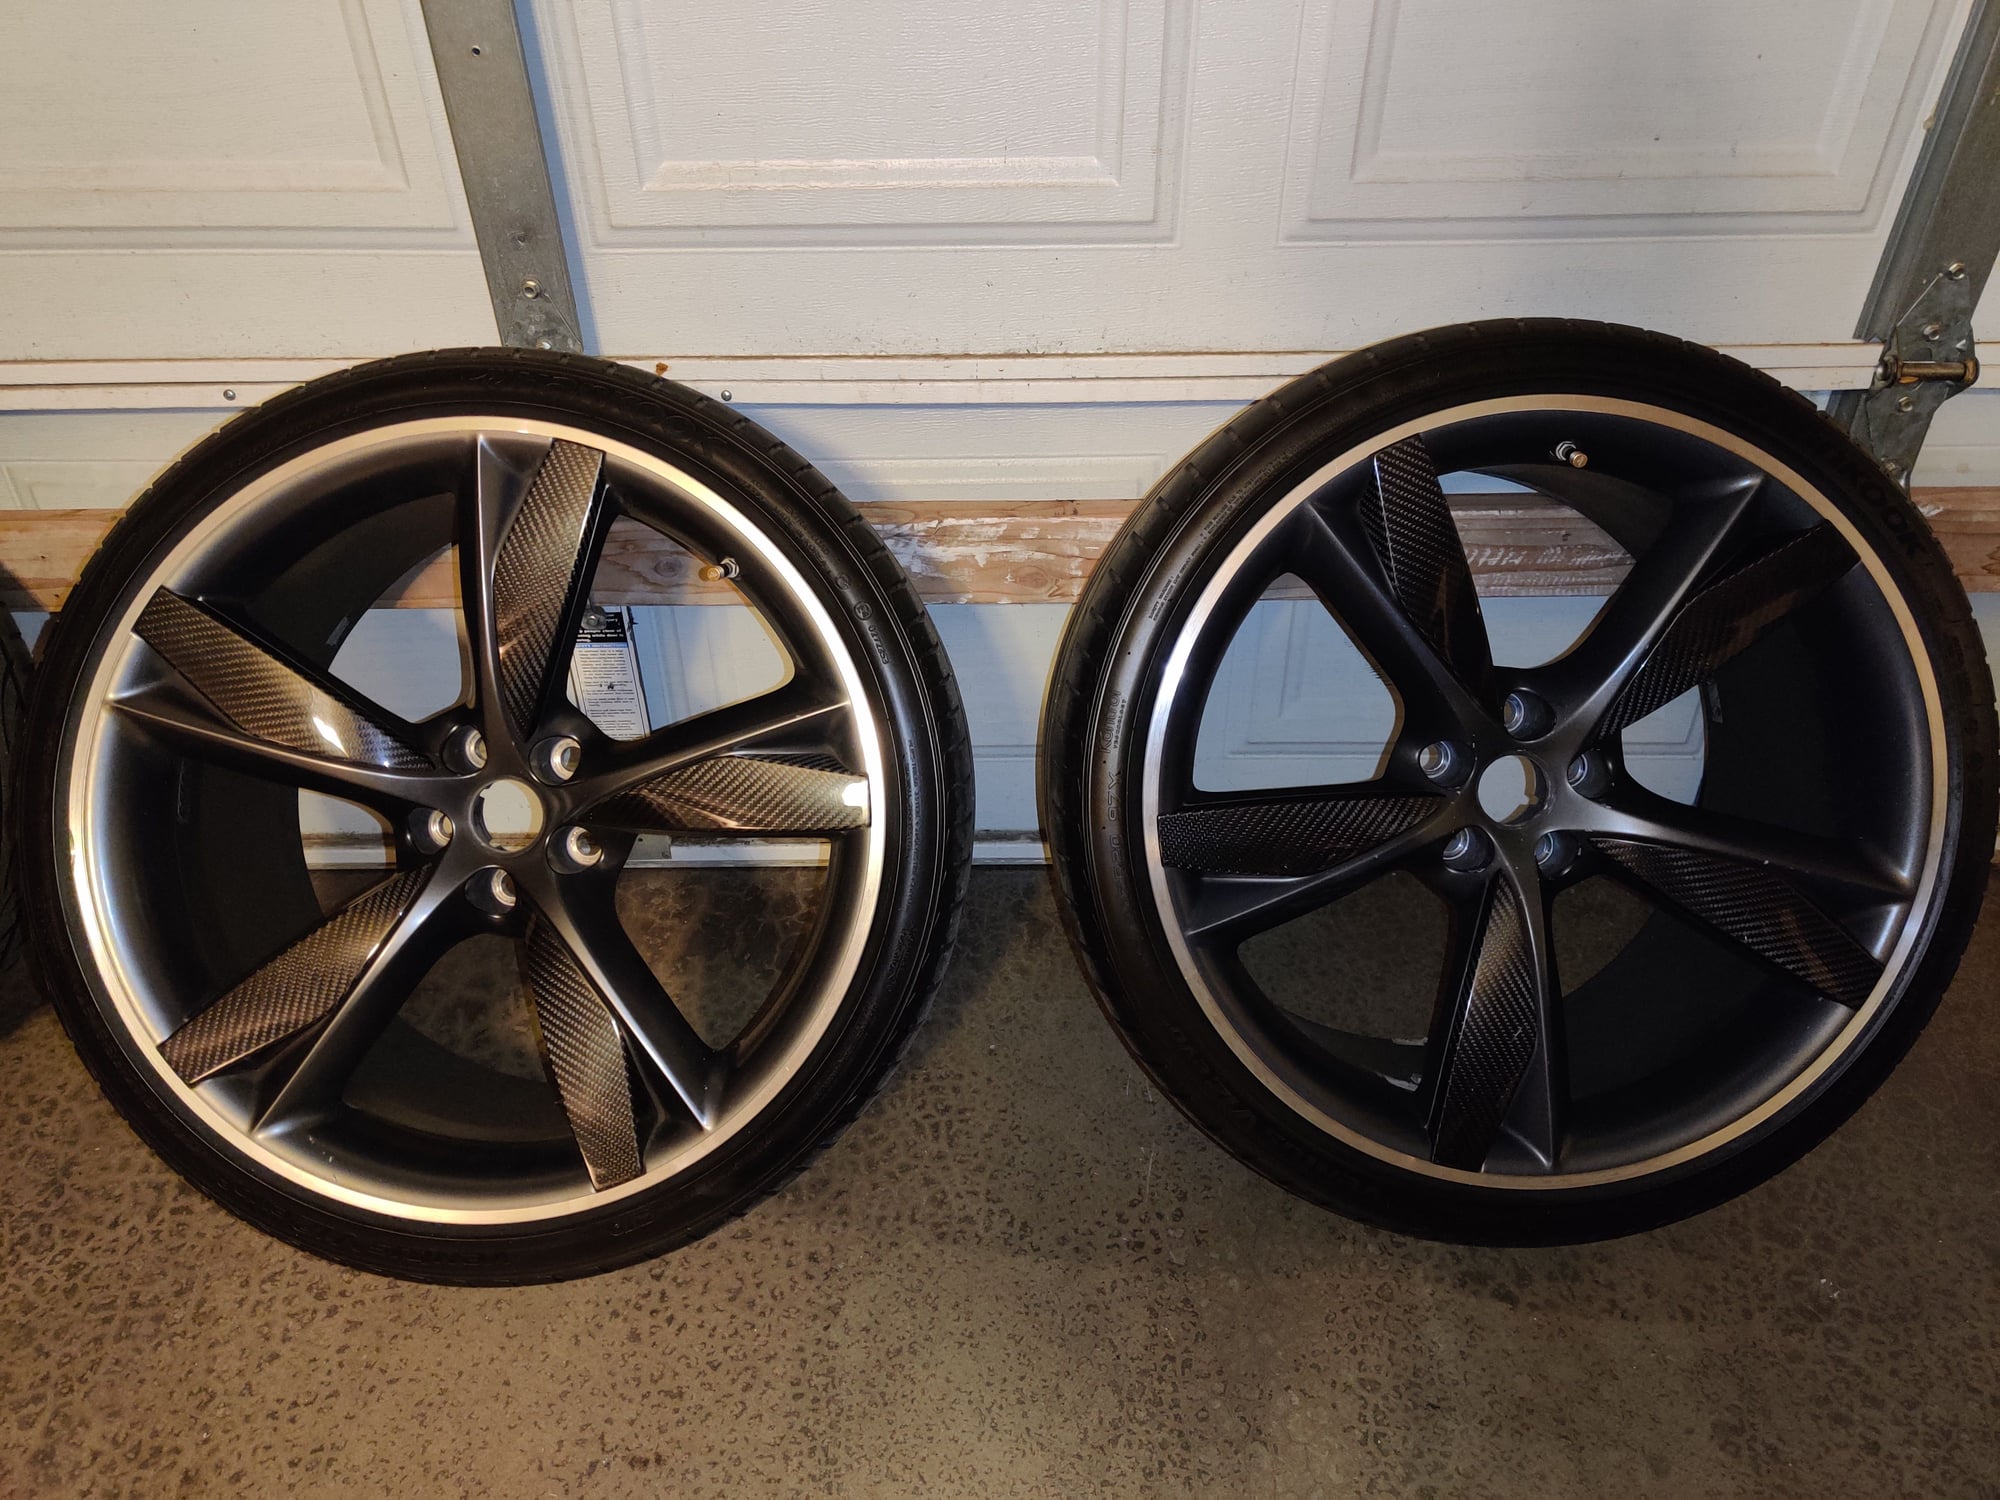 Wheels and Tires/Axles - 2 Jaguar carbon blade wheels 10.5" rears - Used - Highland, CA 92346, United States